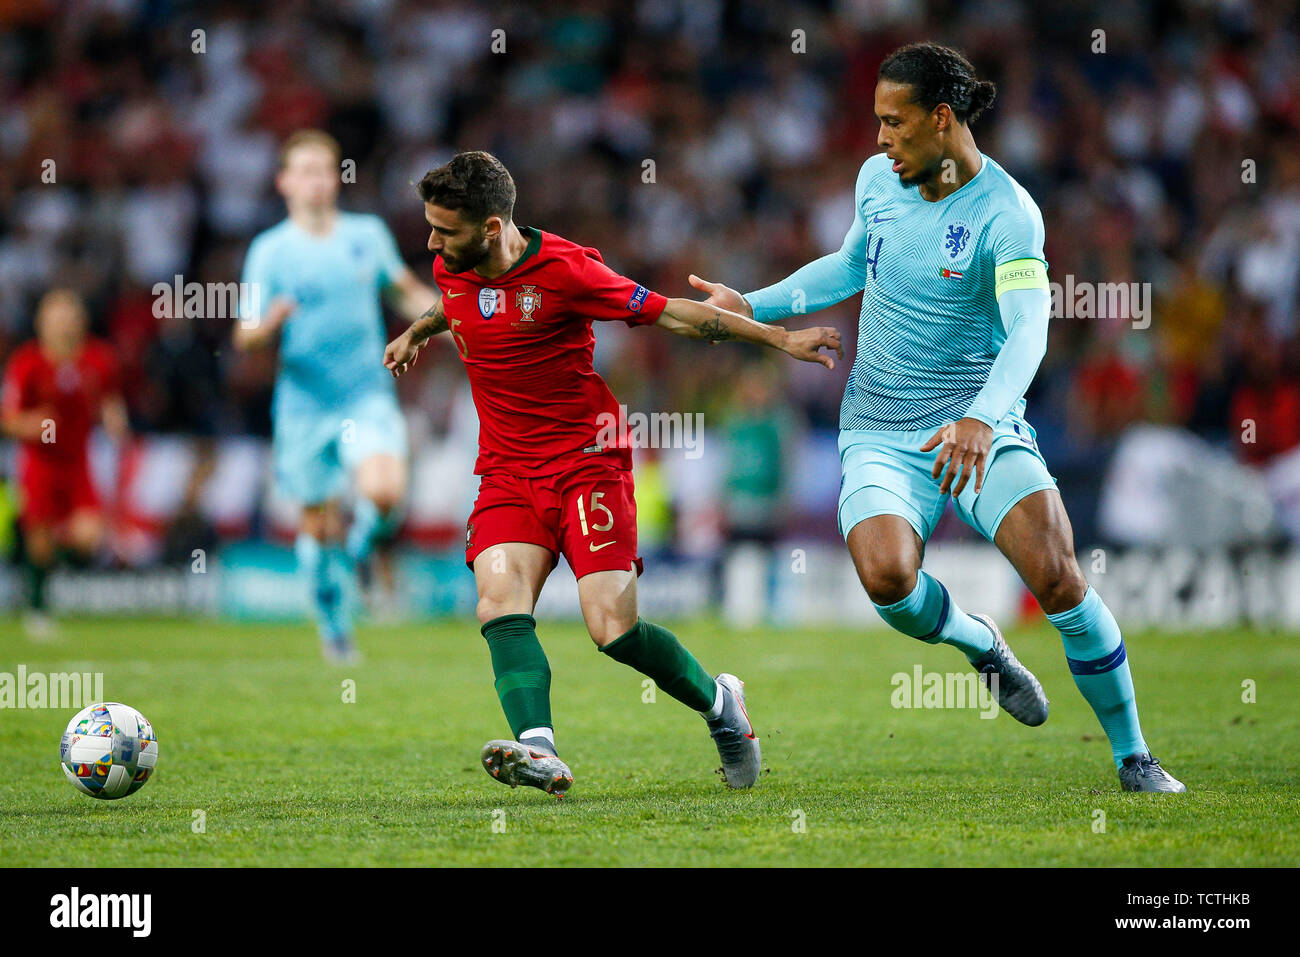 Porto, Portugal. 09th June, 2019. Rafa Silva of Portugal and Virgil van Dijk of Netherlands during the UEFA Nations League Final match between Portugal and Netherlands at Estadio do Dragao on June 9th 2019 in Porto, Portugal. (Photo by Daniel Chesterton/phcimages.com) Credit: PHC Images/Alamy Live News Stock Photo